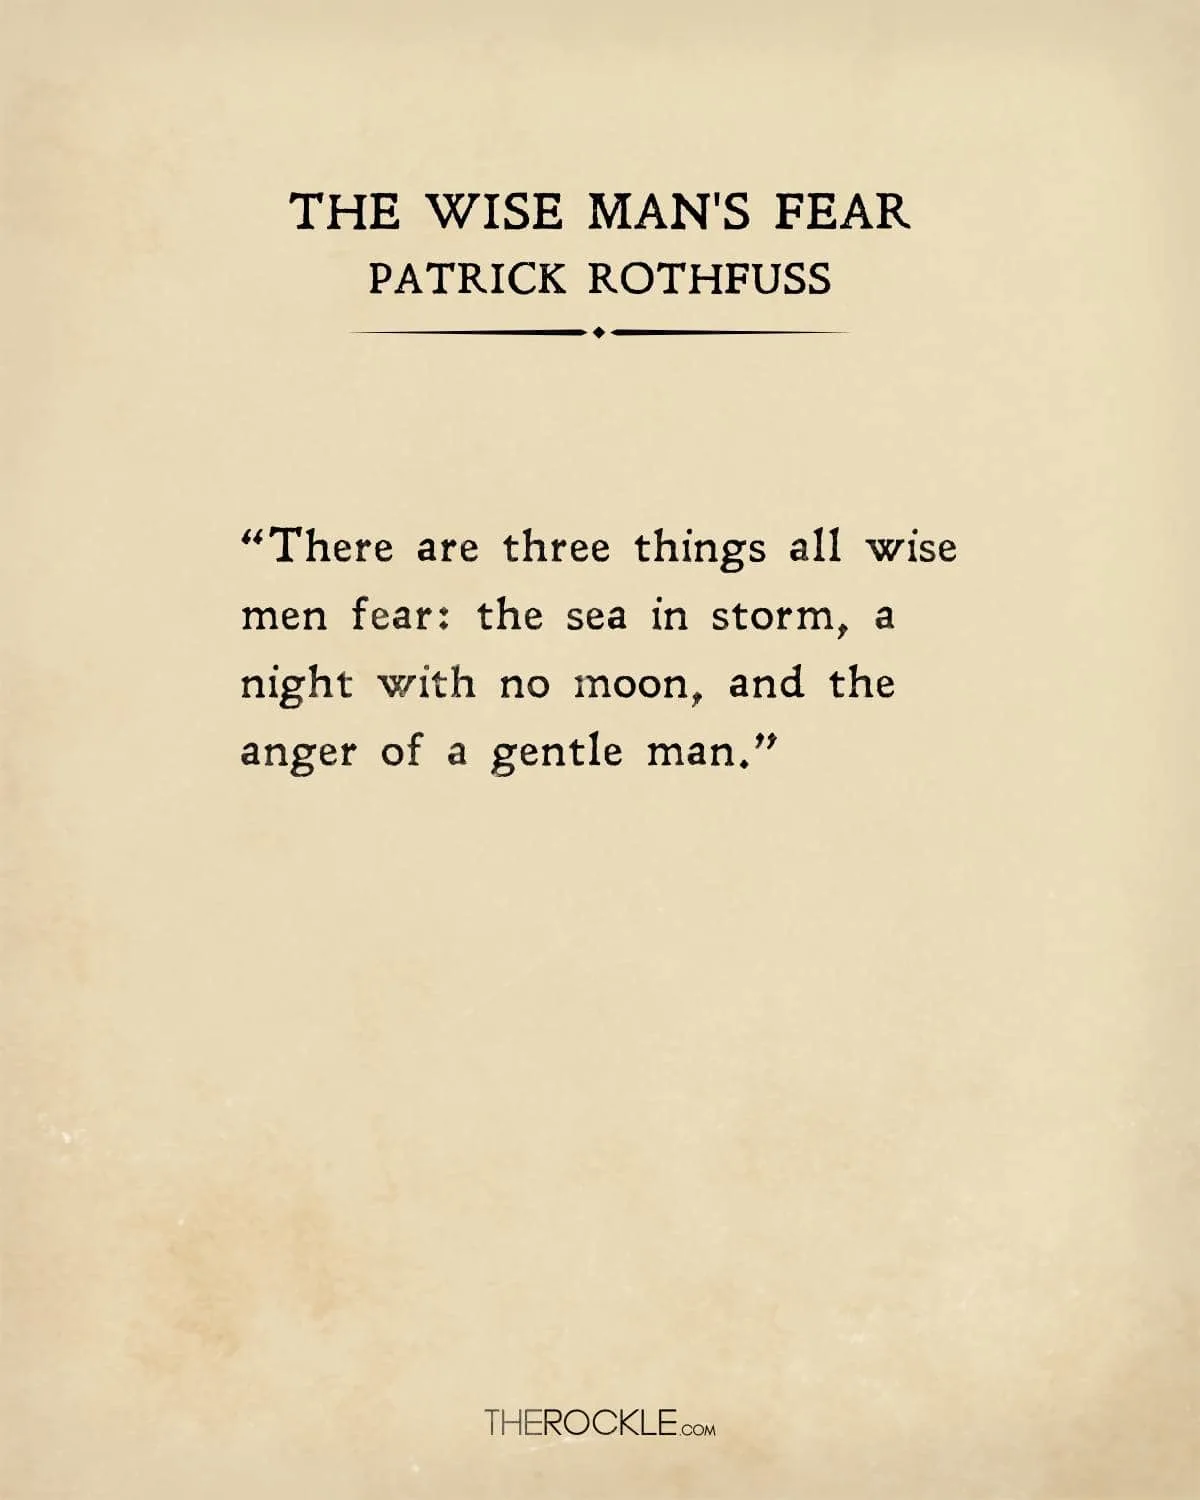 Patrick Rothfuss on fears of wise men